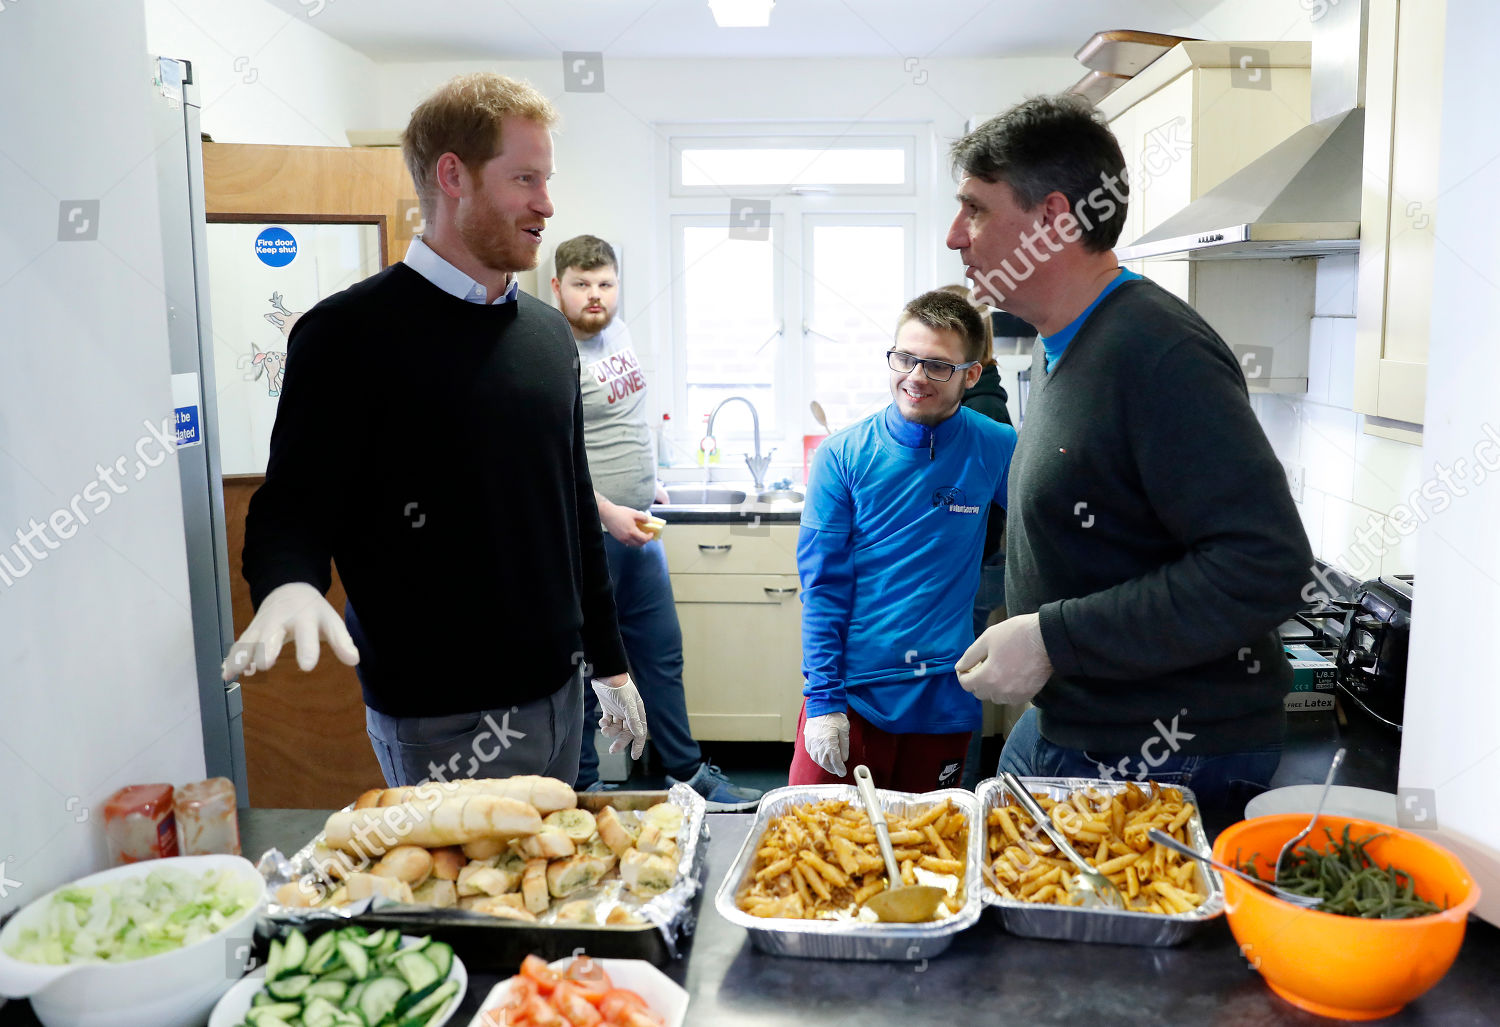 prince-harry-visit-to-fit-and-fed-half-term-initiative-streatham-london-uk-shutterstock-editorial-10110713v.jpg